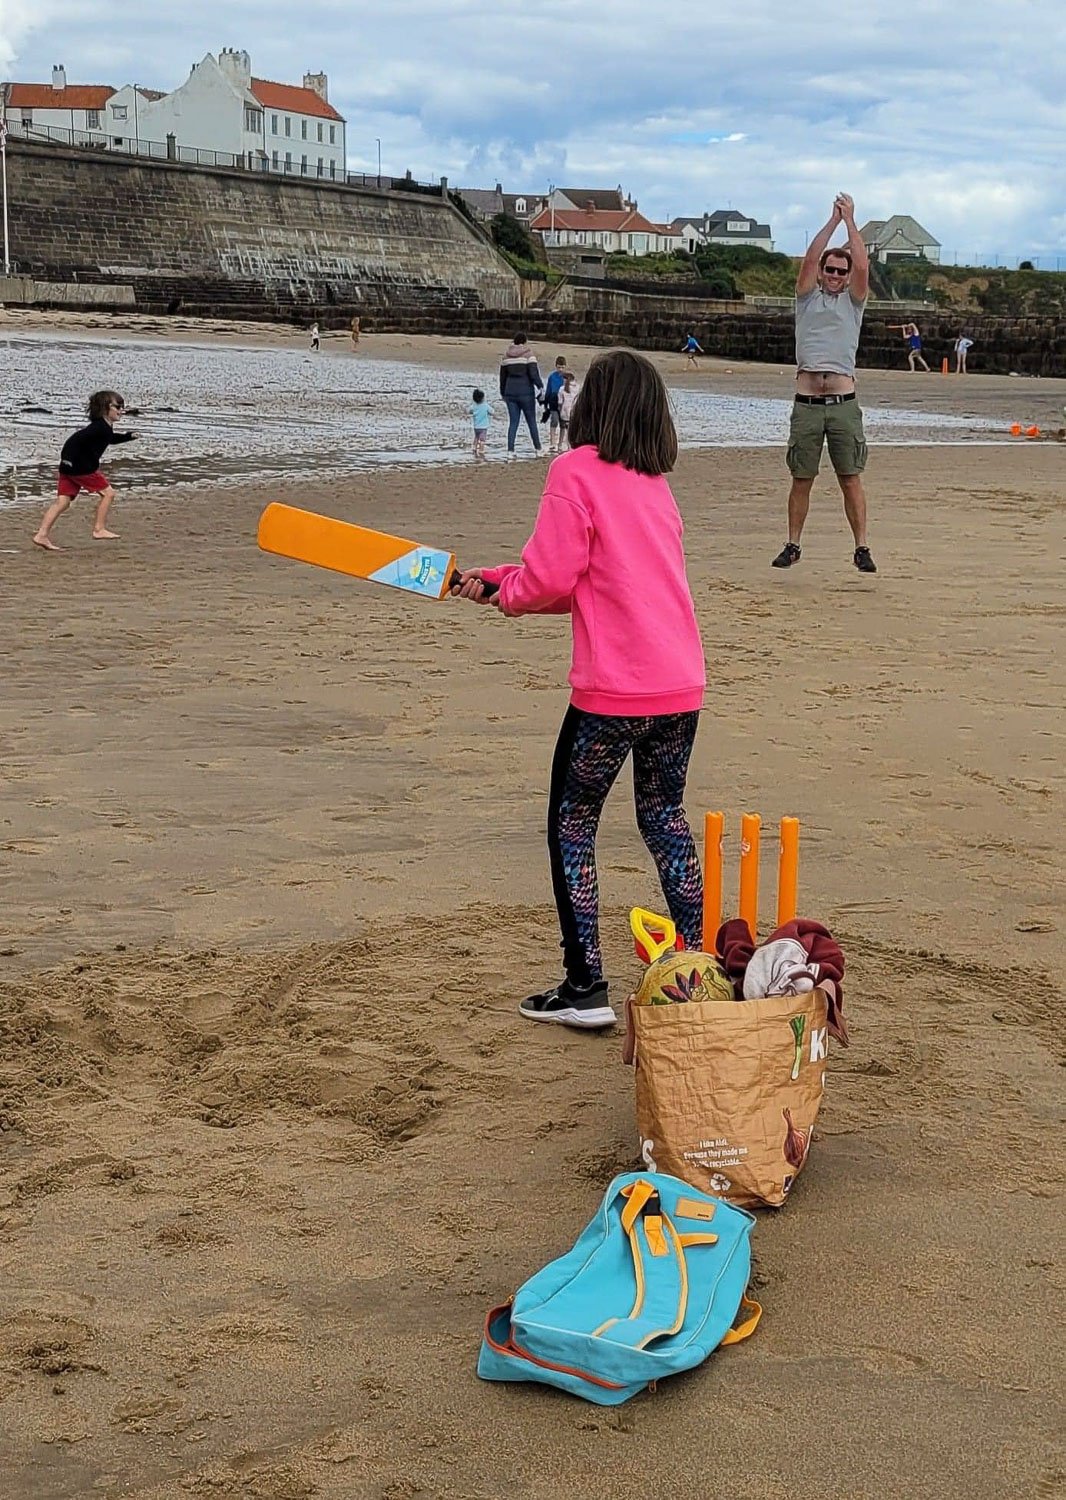 A family of three playing cricket on a beach